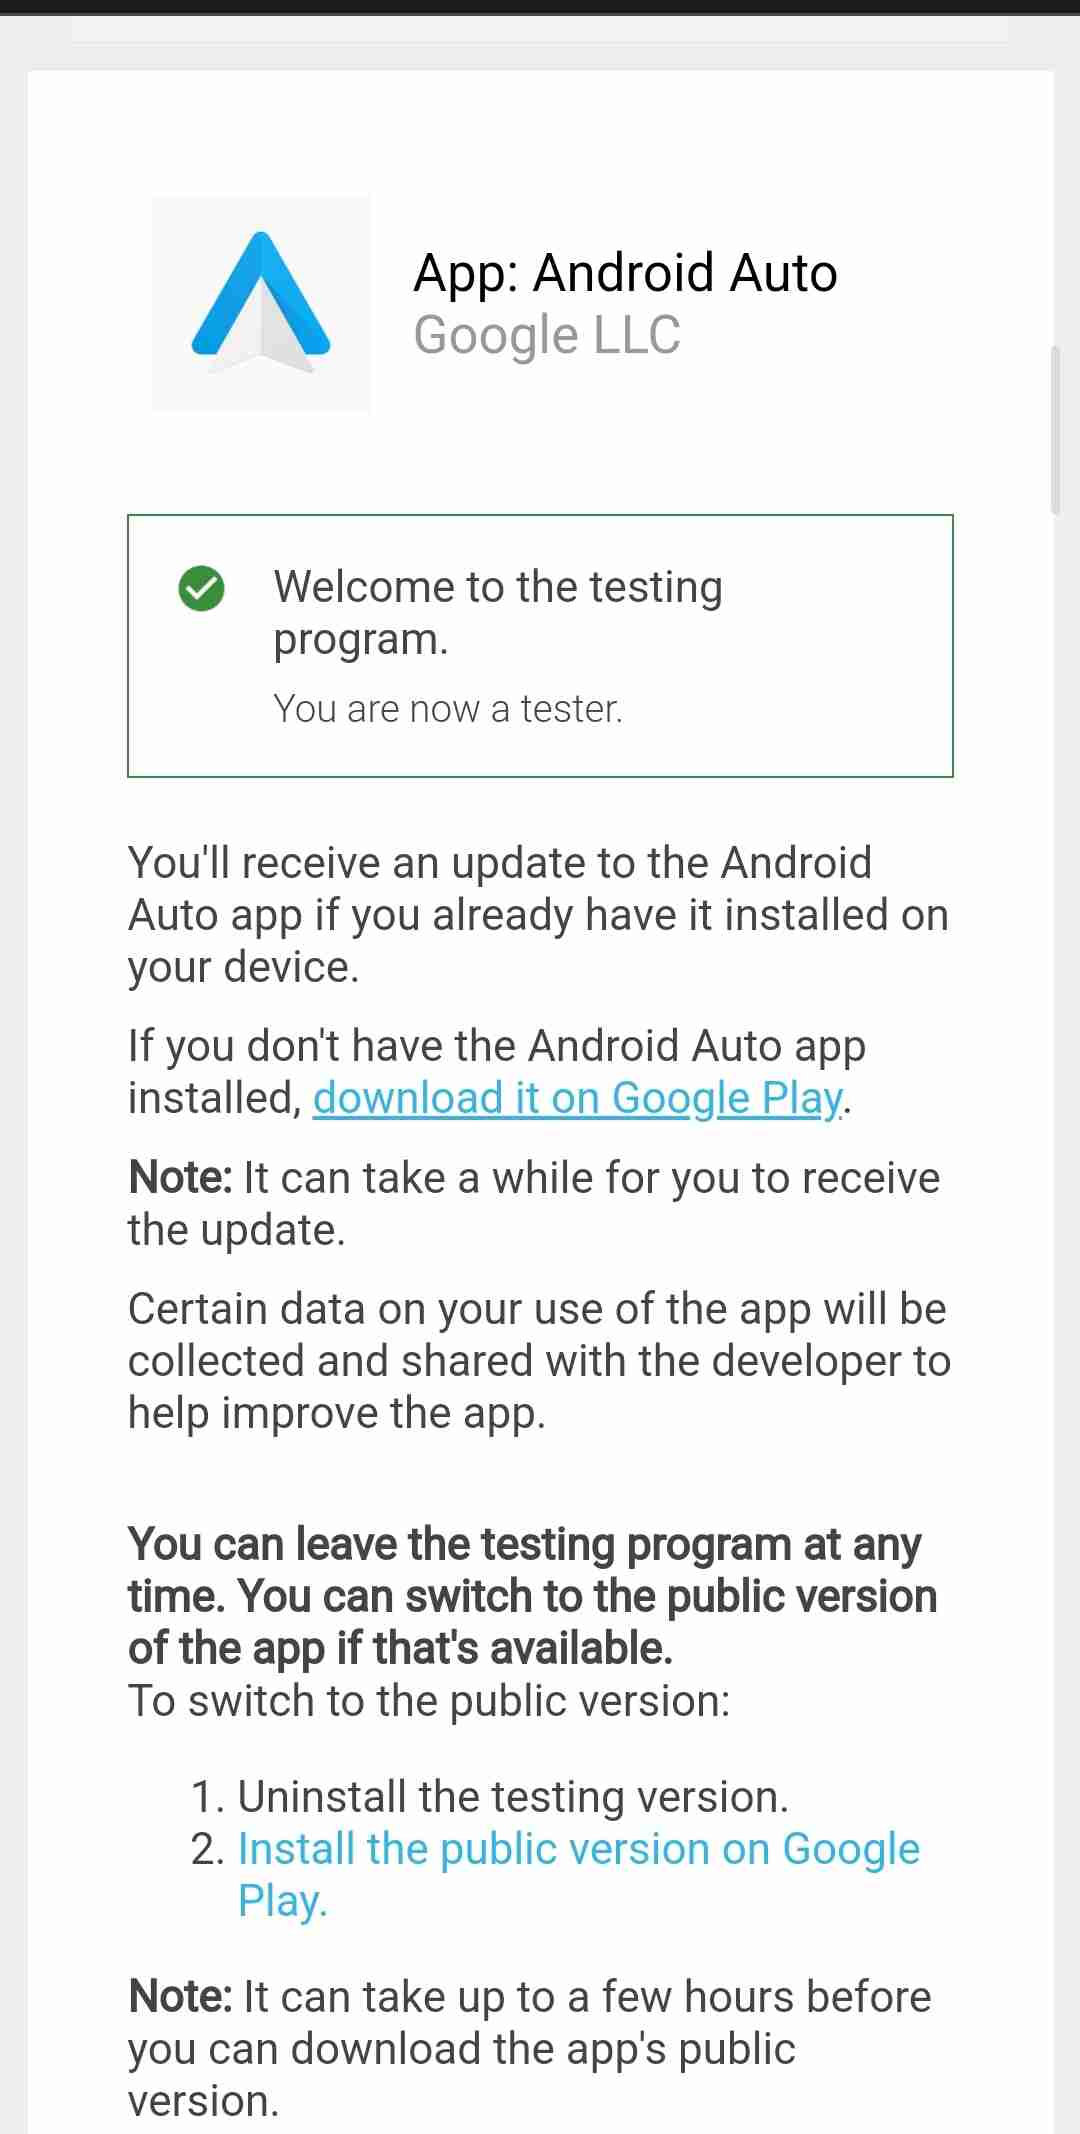 Google is recruiting new Android Auto beta testers